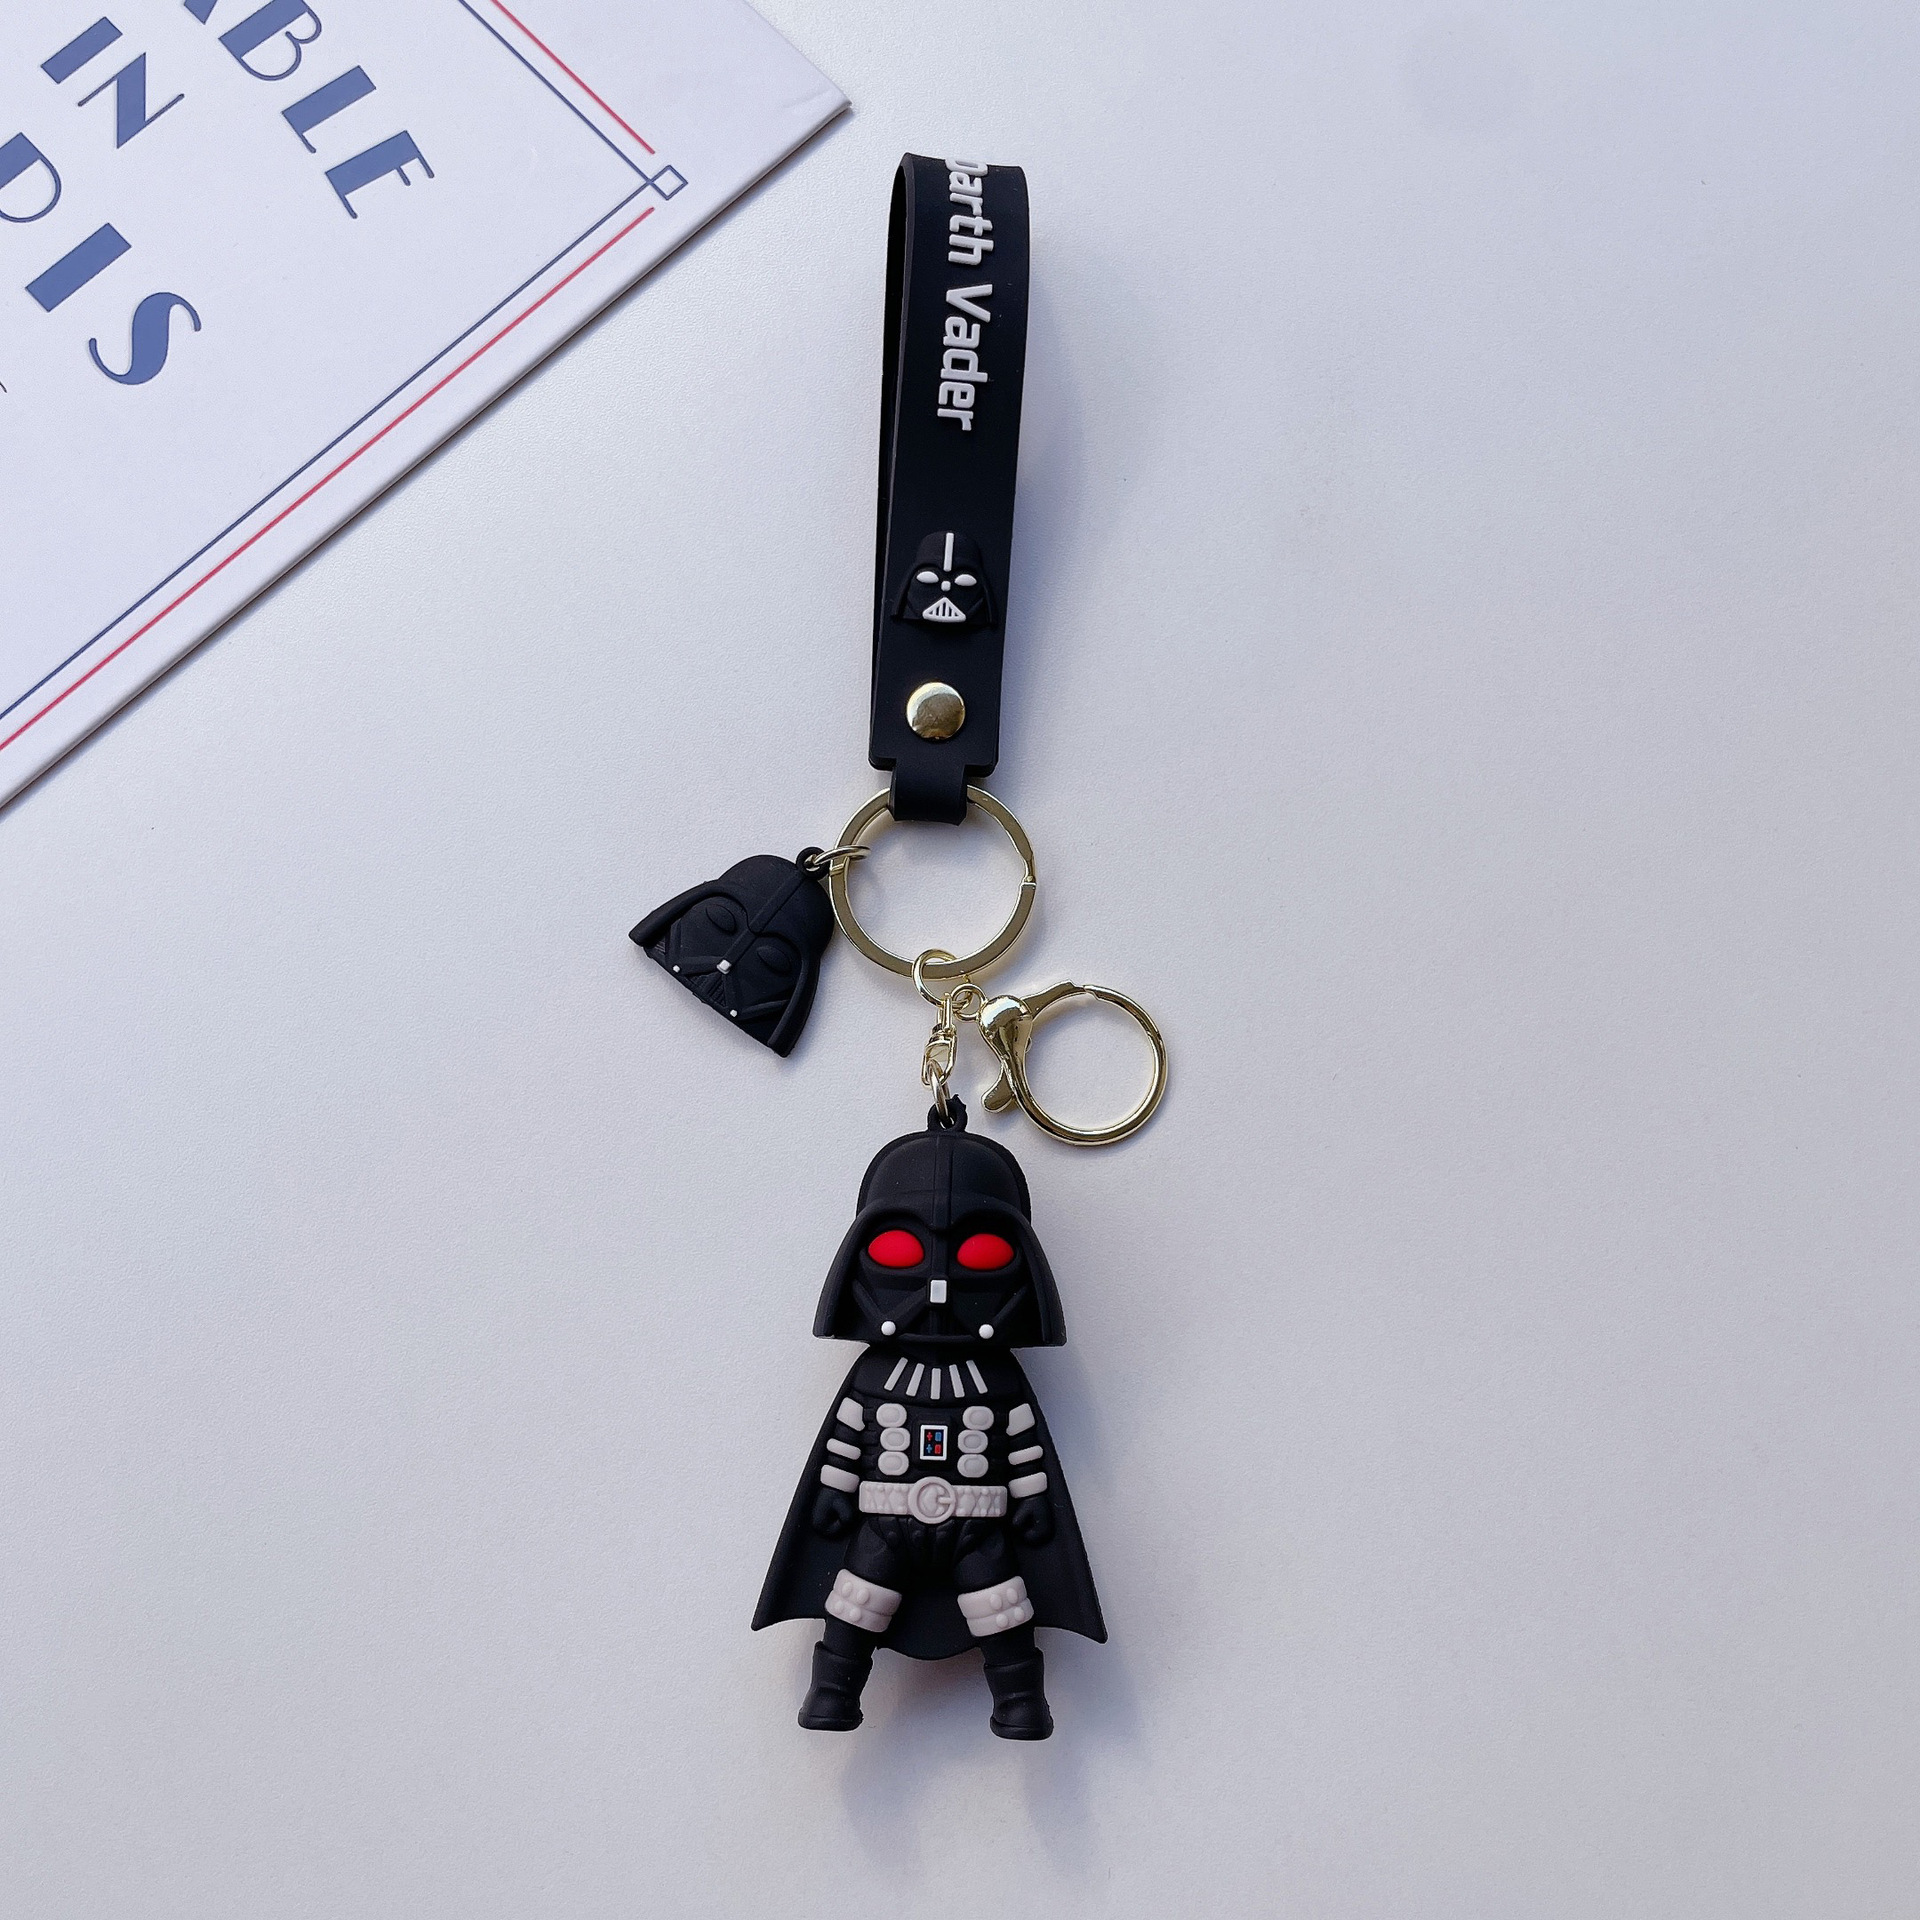 Cartoon Star Wars Black and White Warrior Keychain Pendant Creative Couple Bags Car Pendant Small Gift Wholesale